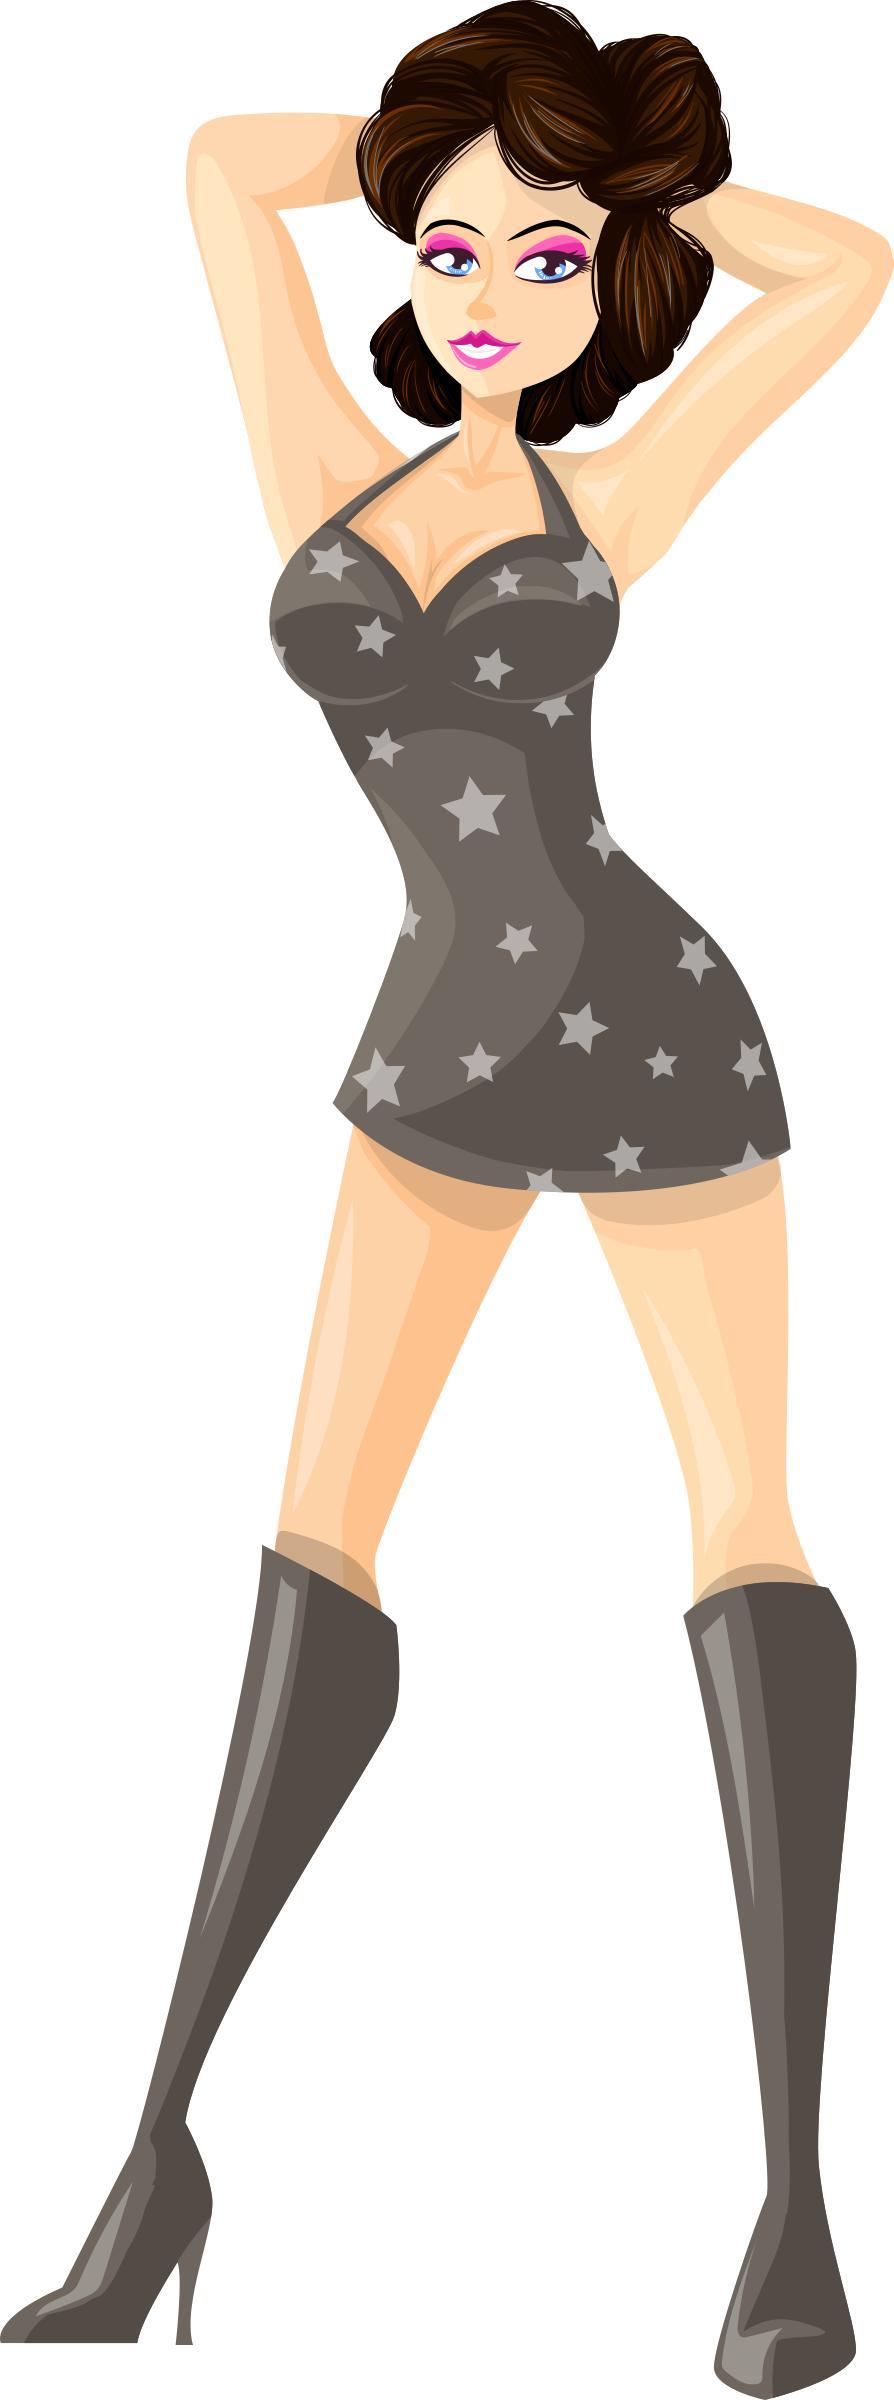 Young lady 2 (brown hair, light skin, starry dress #1) png transparent